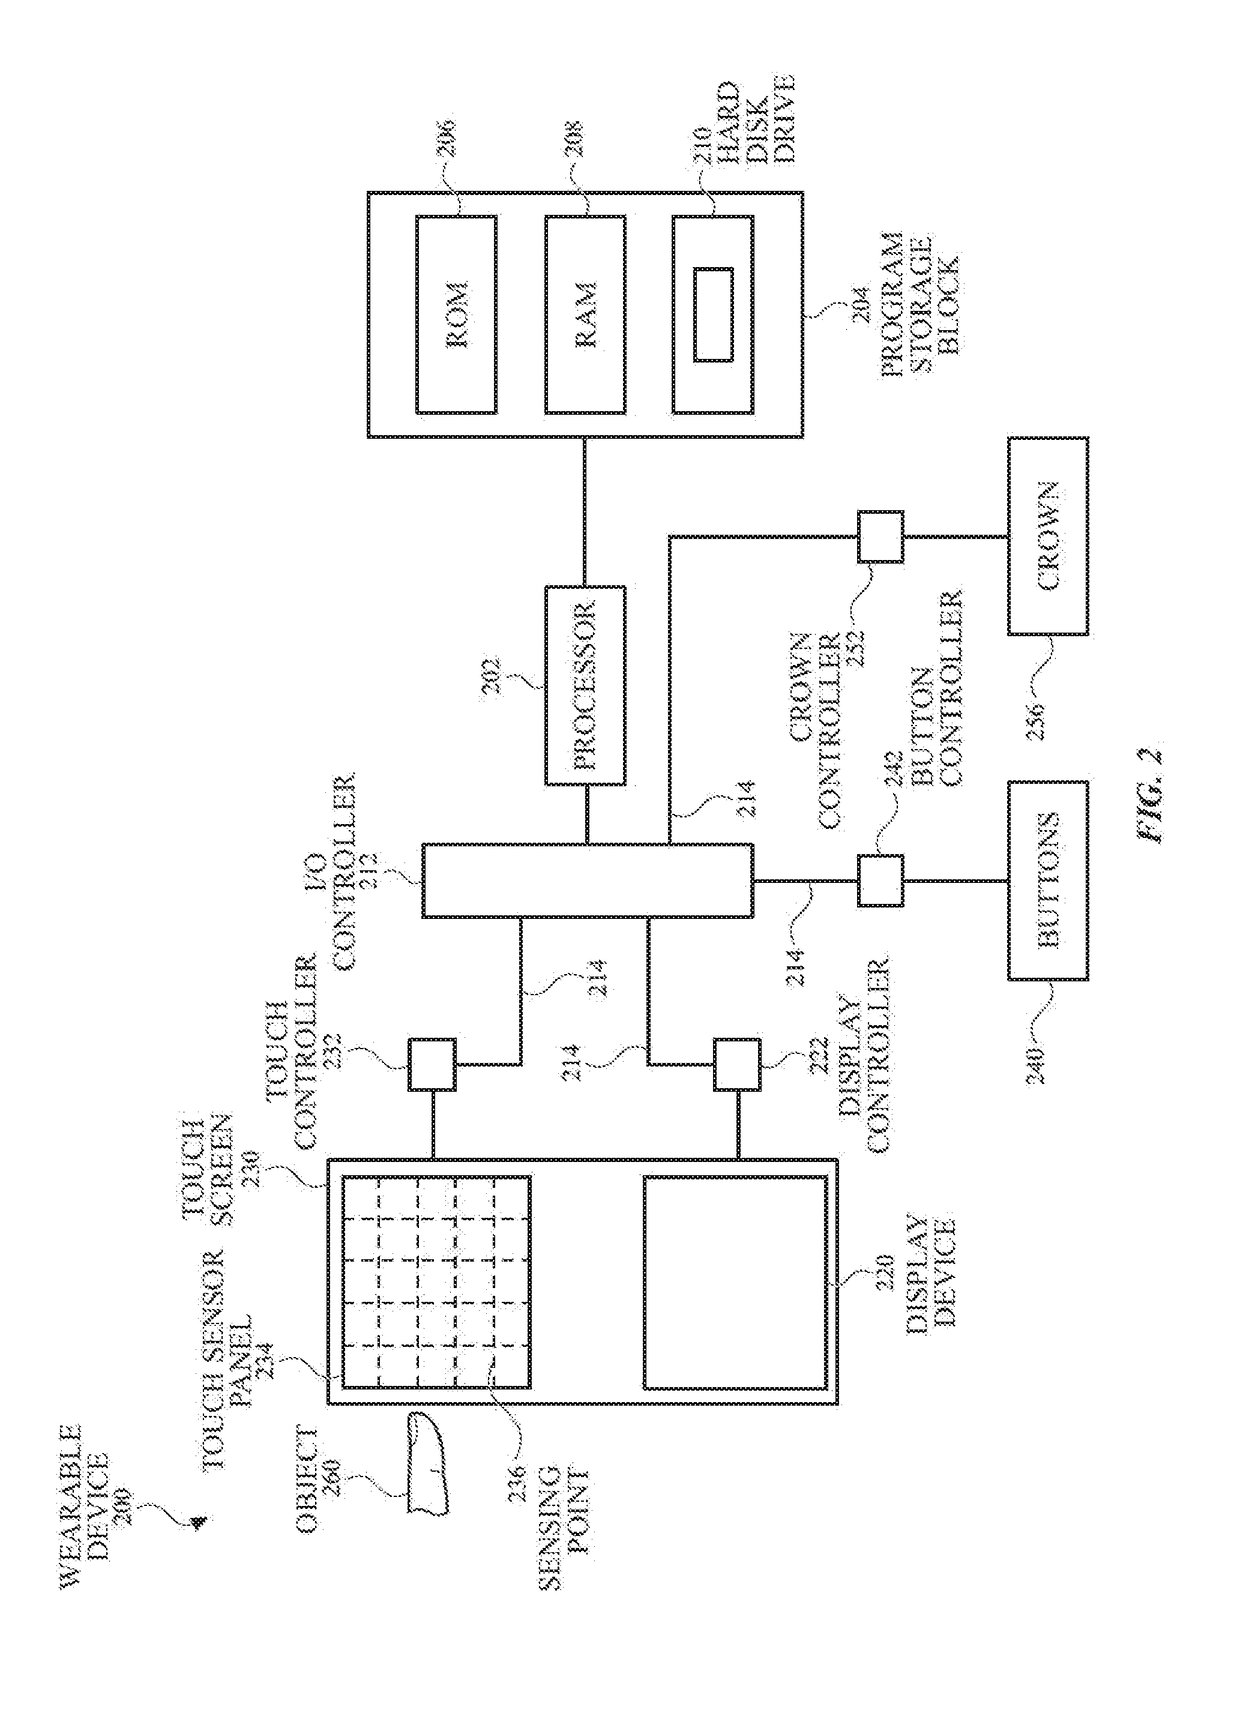 Systems and apparatus for object detection